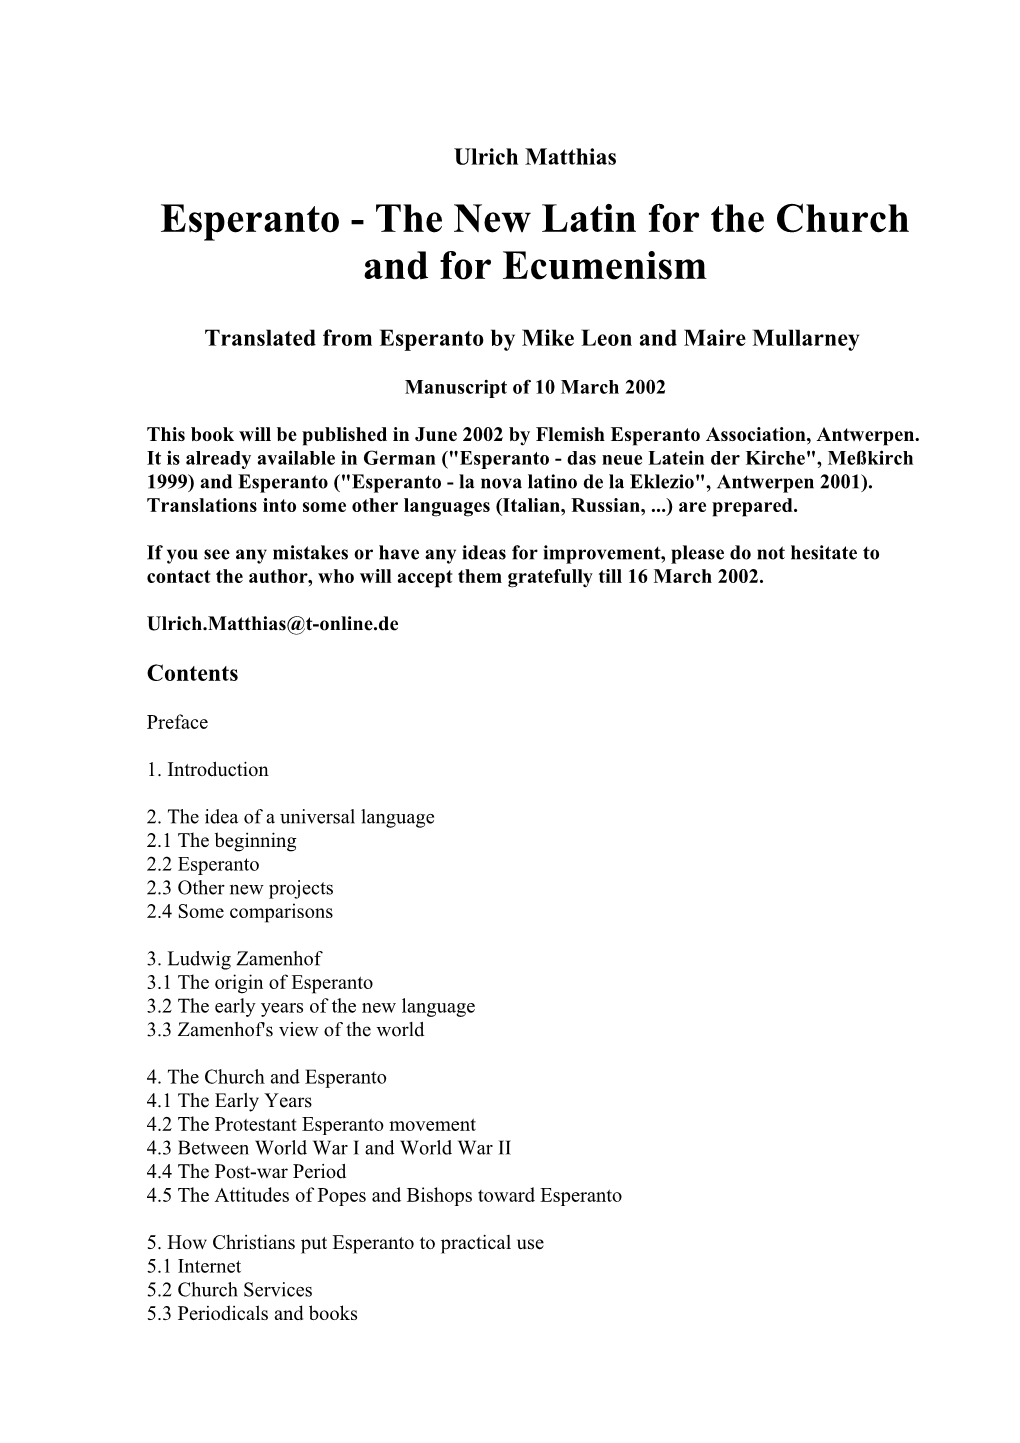 Esperanto - the New Latin for the Church and for Ecumenism